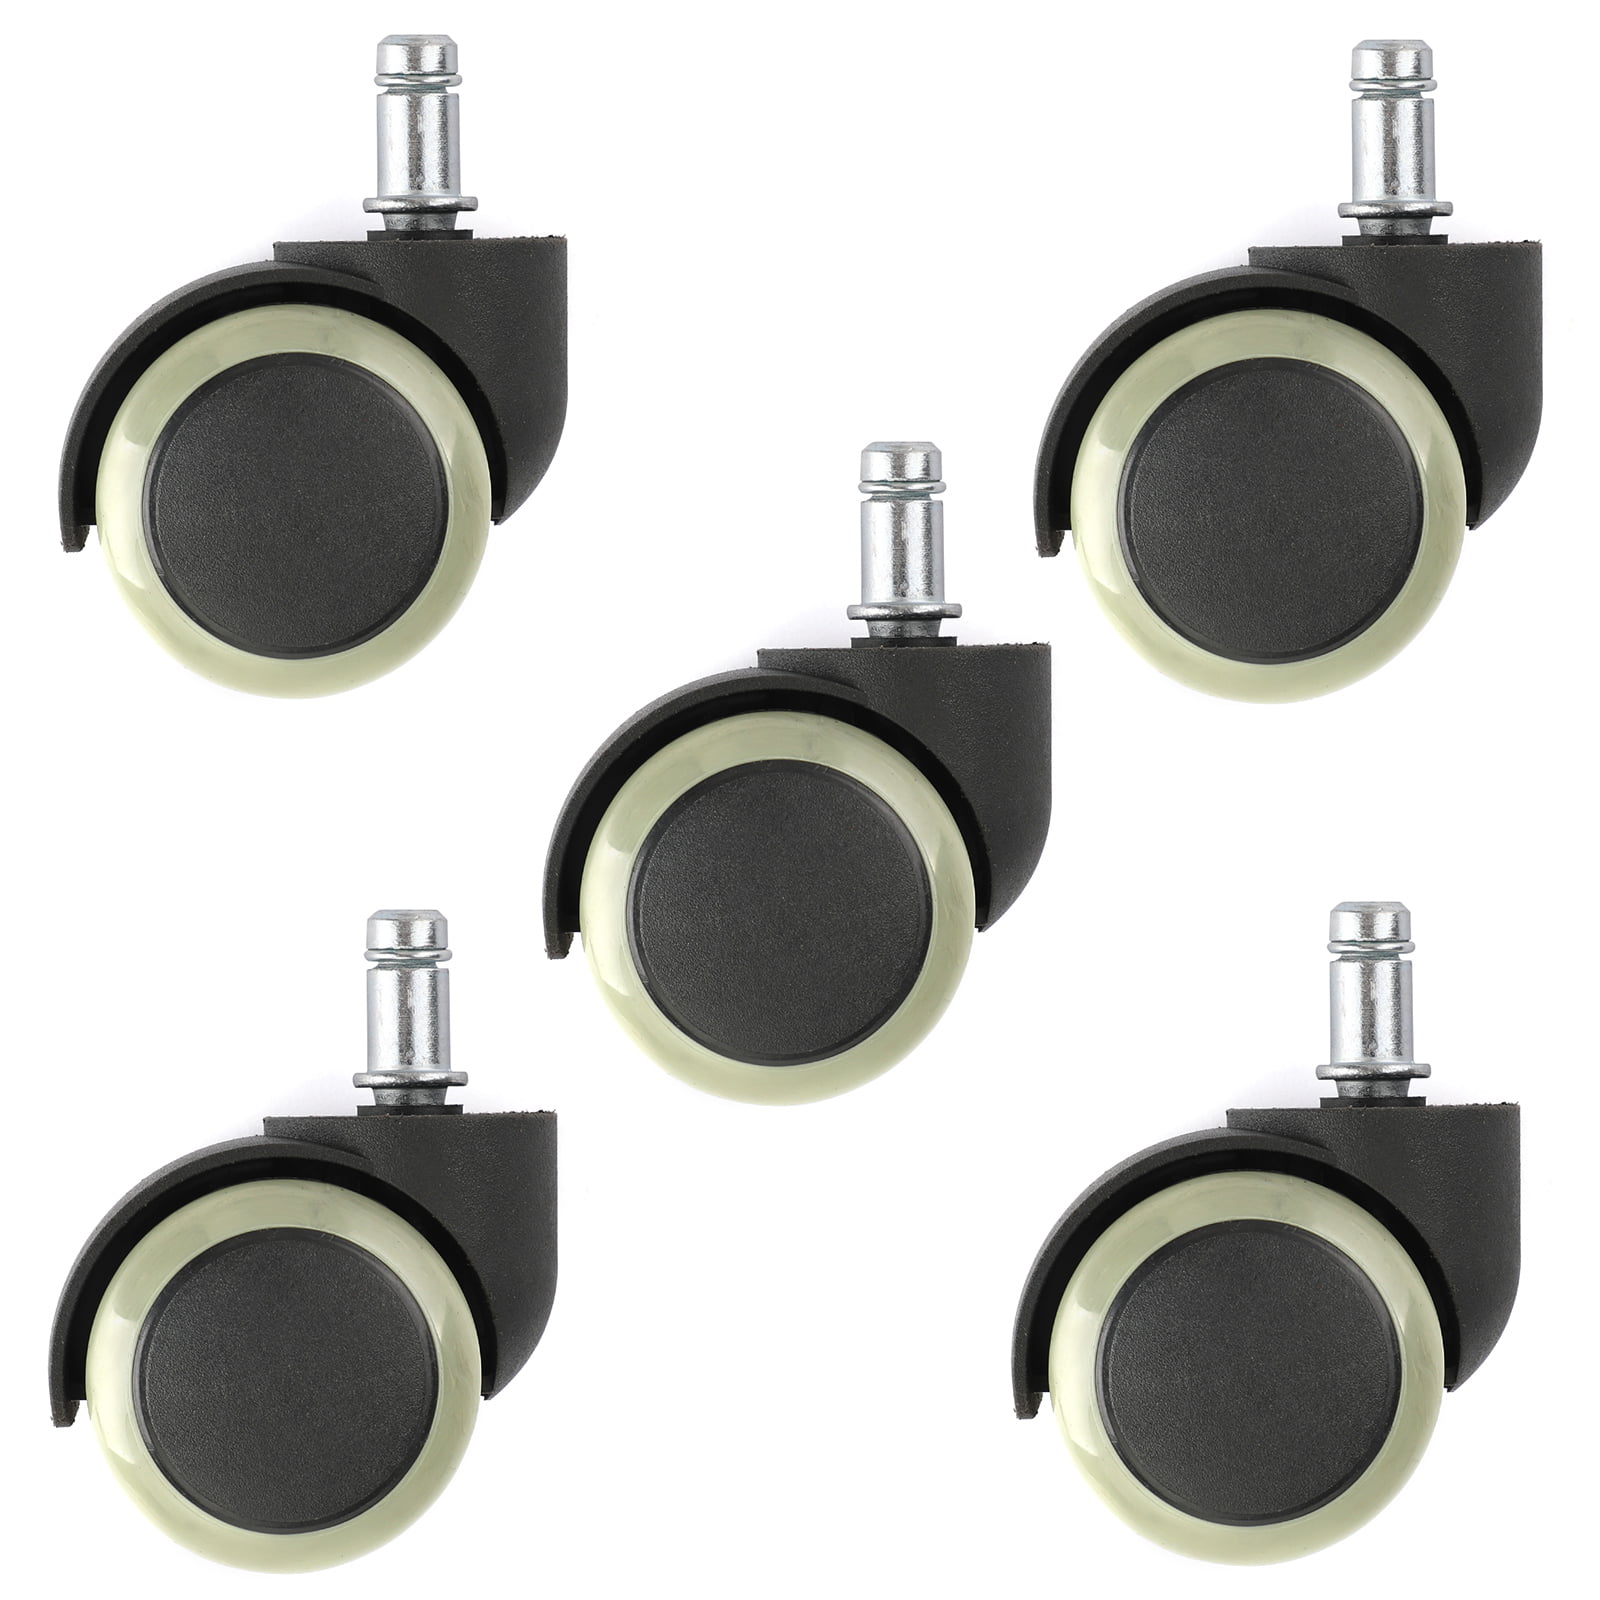 Set of 5 Office Chair Caster Rubber Swivel Wheels Replacement Heavy Duty 2 inch 